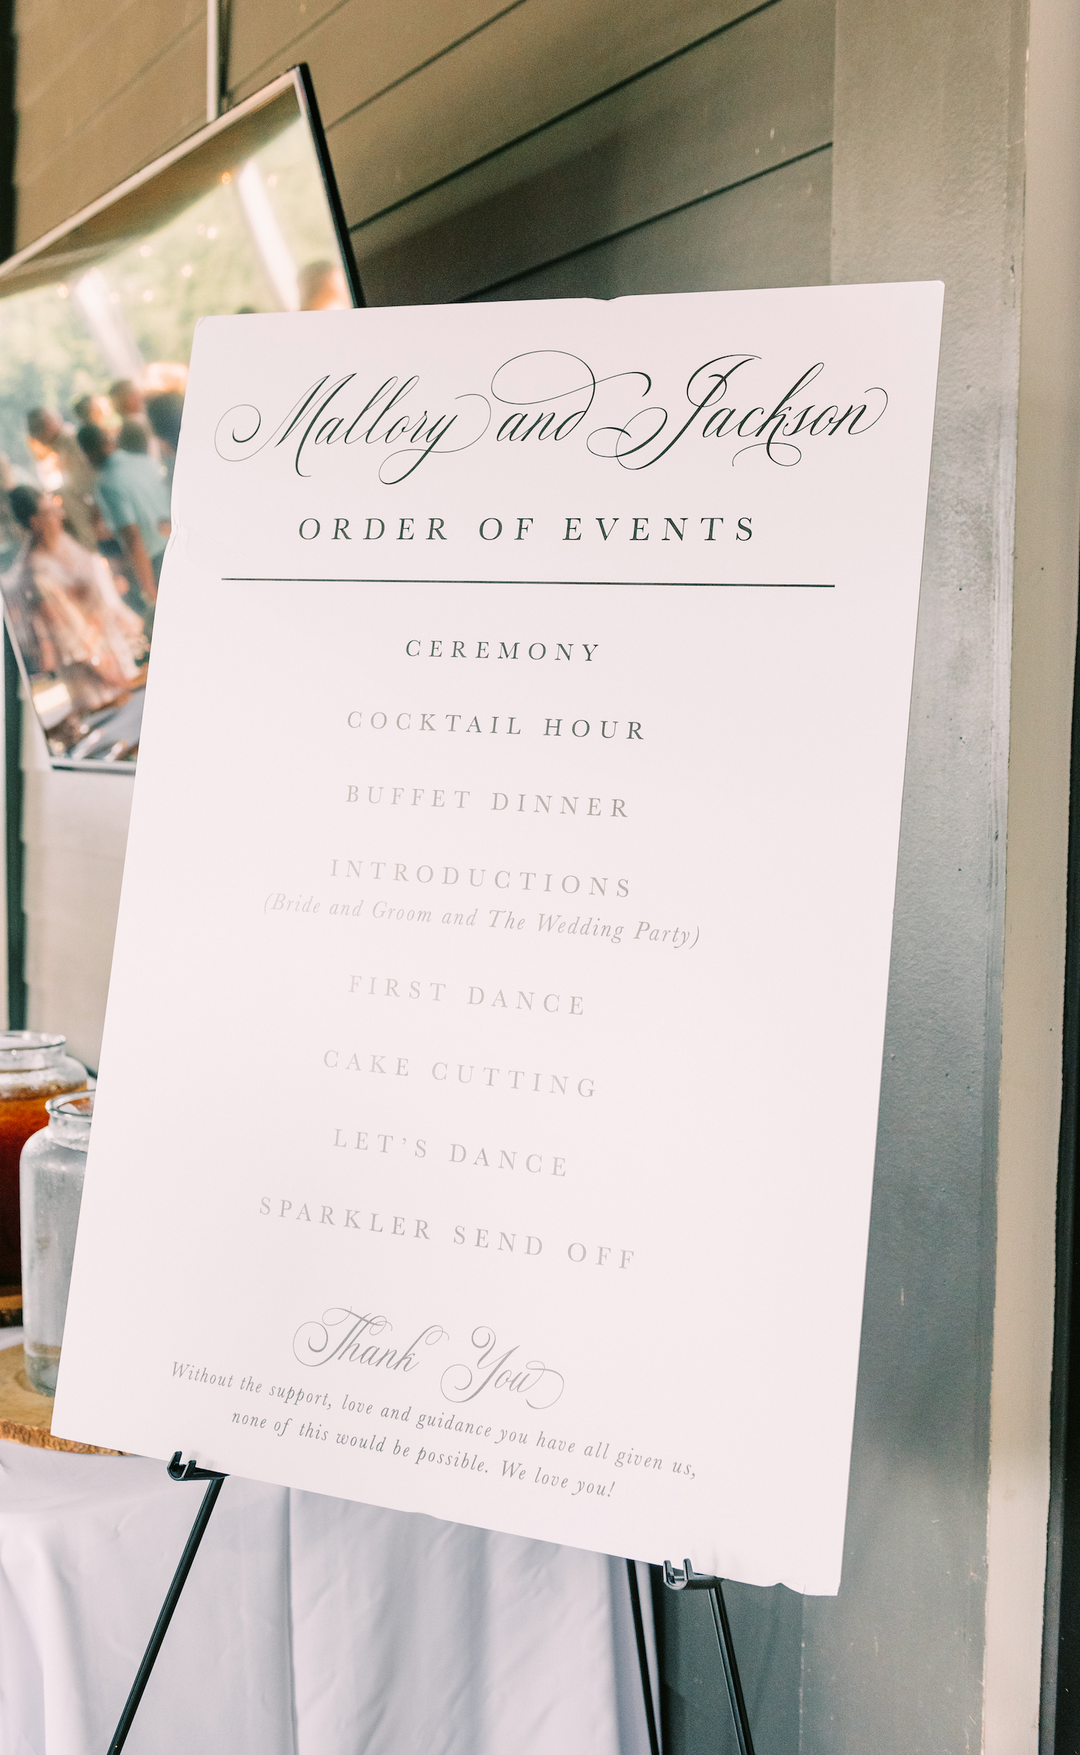 Match My Suite Order of Events Sign